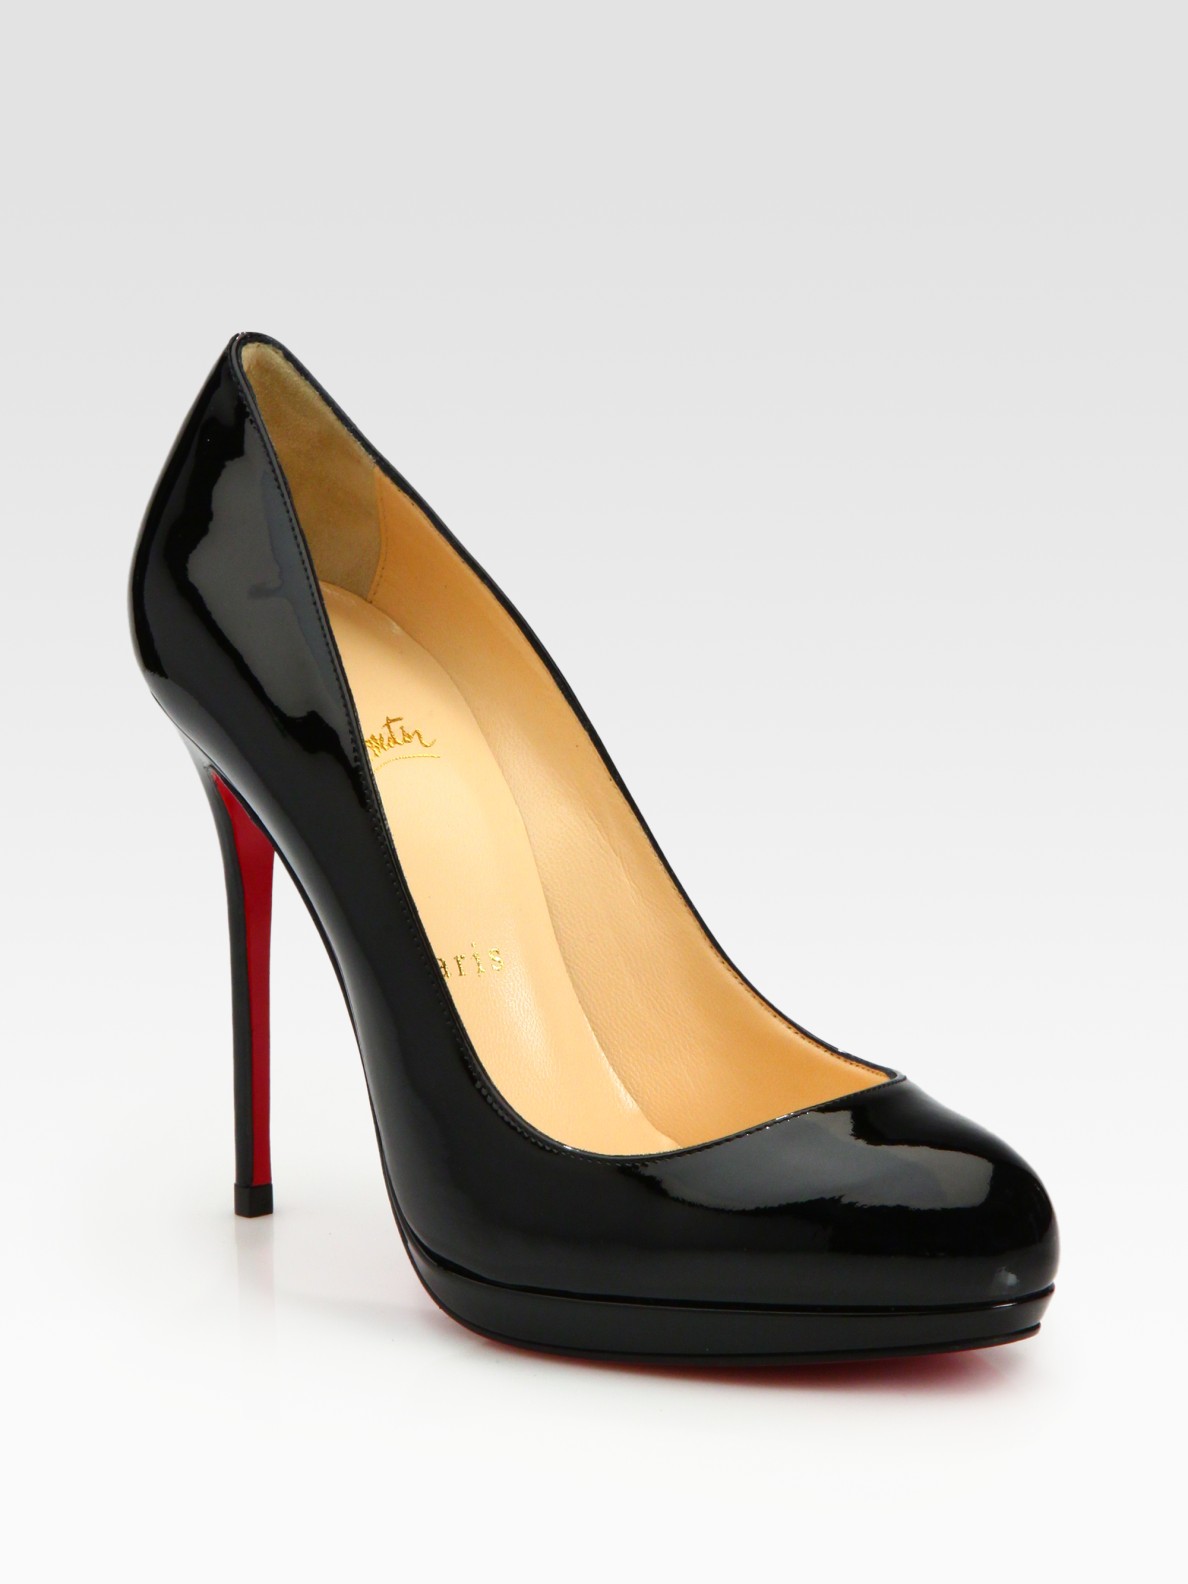 Christian louboutin Patent Leather Platform Pumps in Black | Lyst